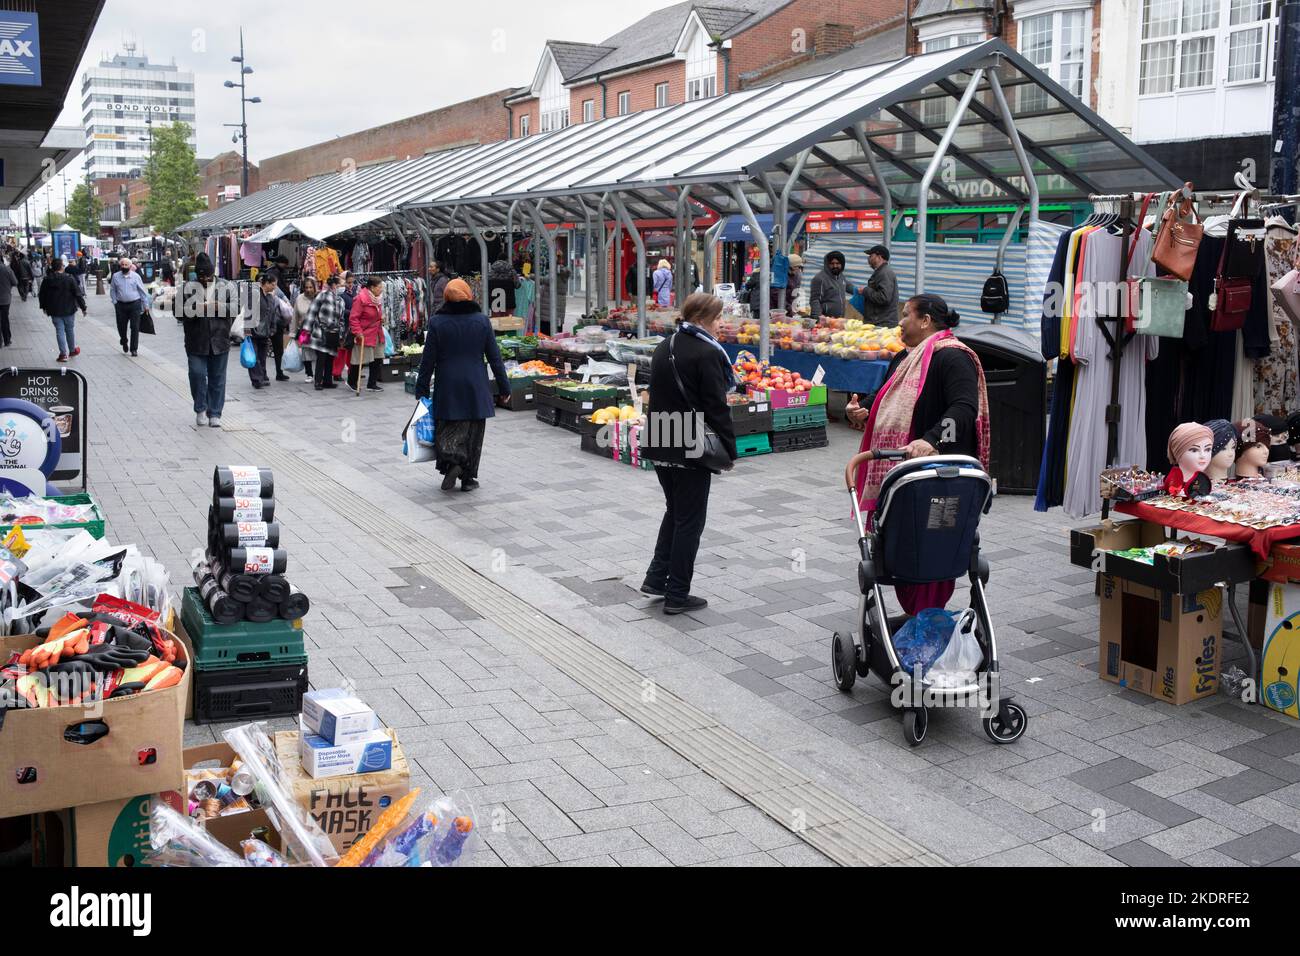 The outdoor market in West Bromwich High Street. Stock Photo